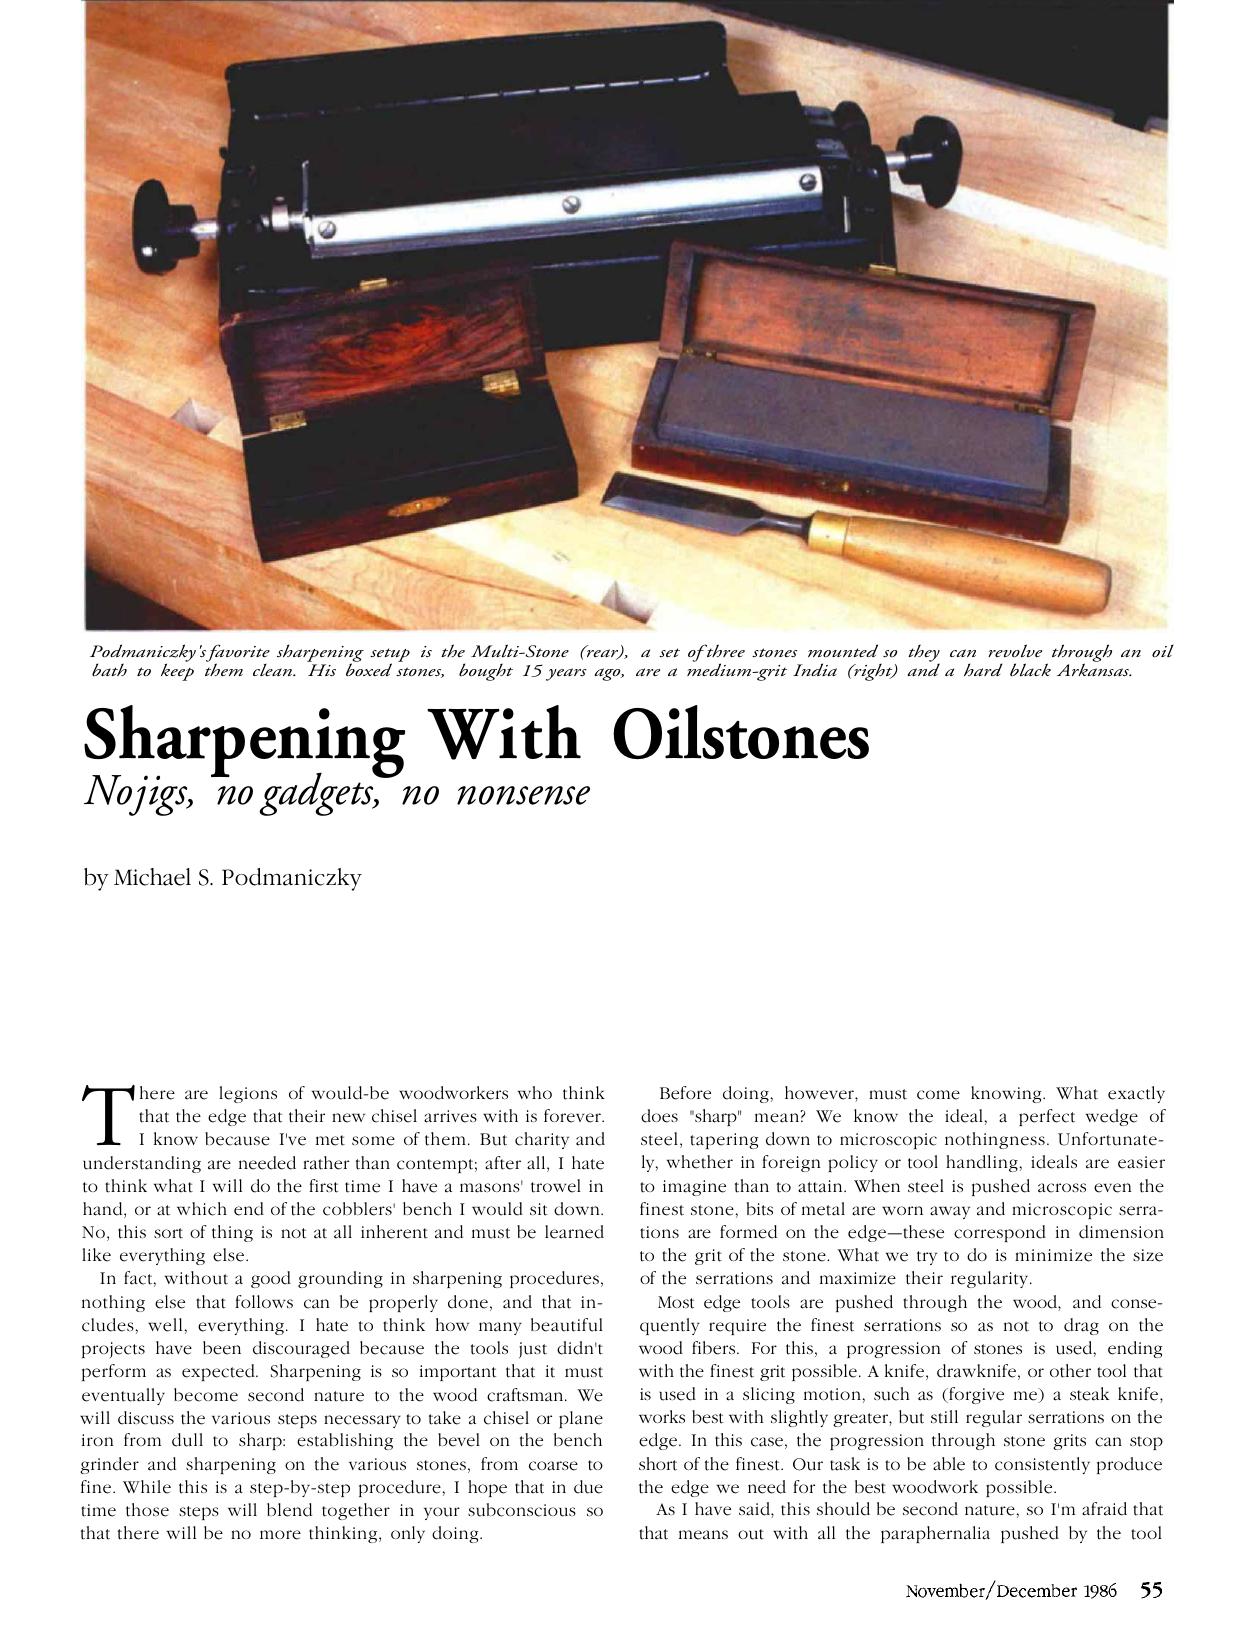 Sharpening With Oilstones by Michael S. Podmaniczky